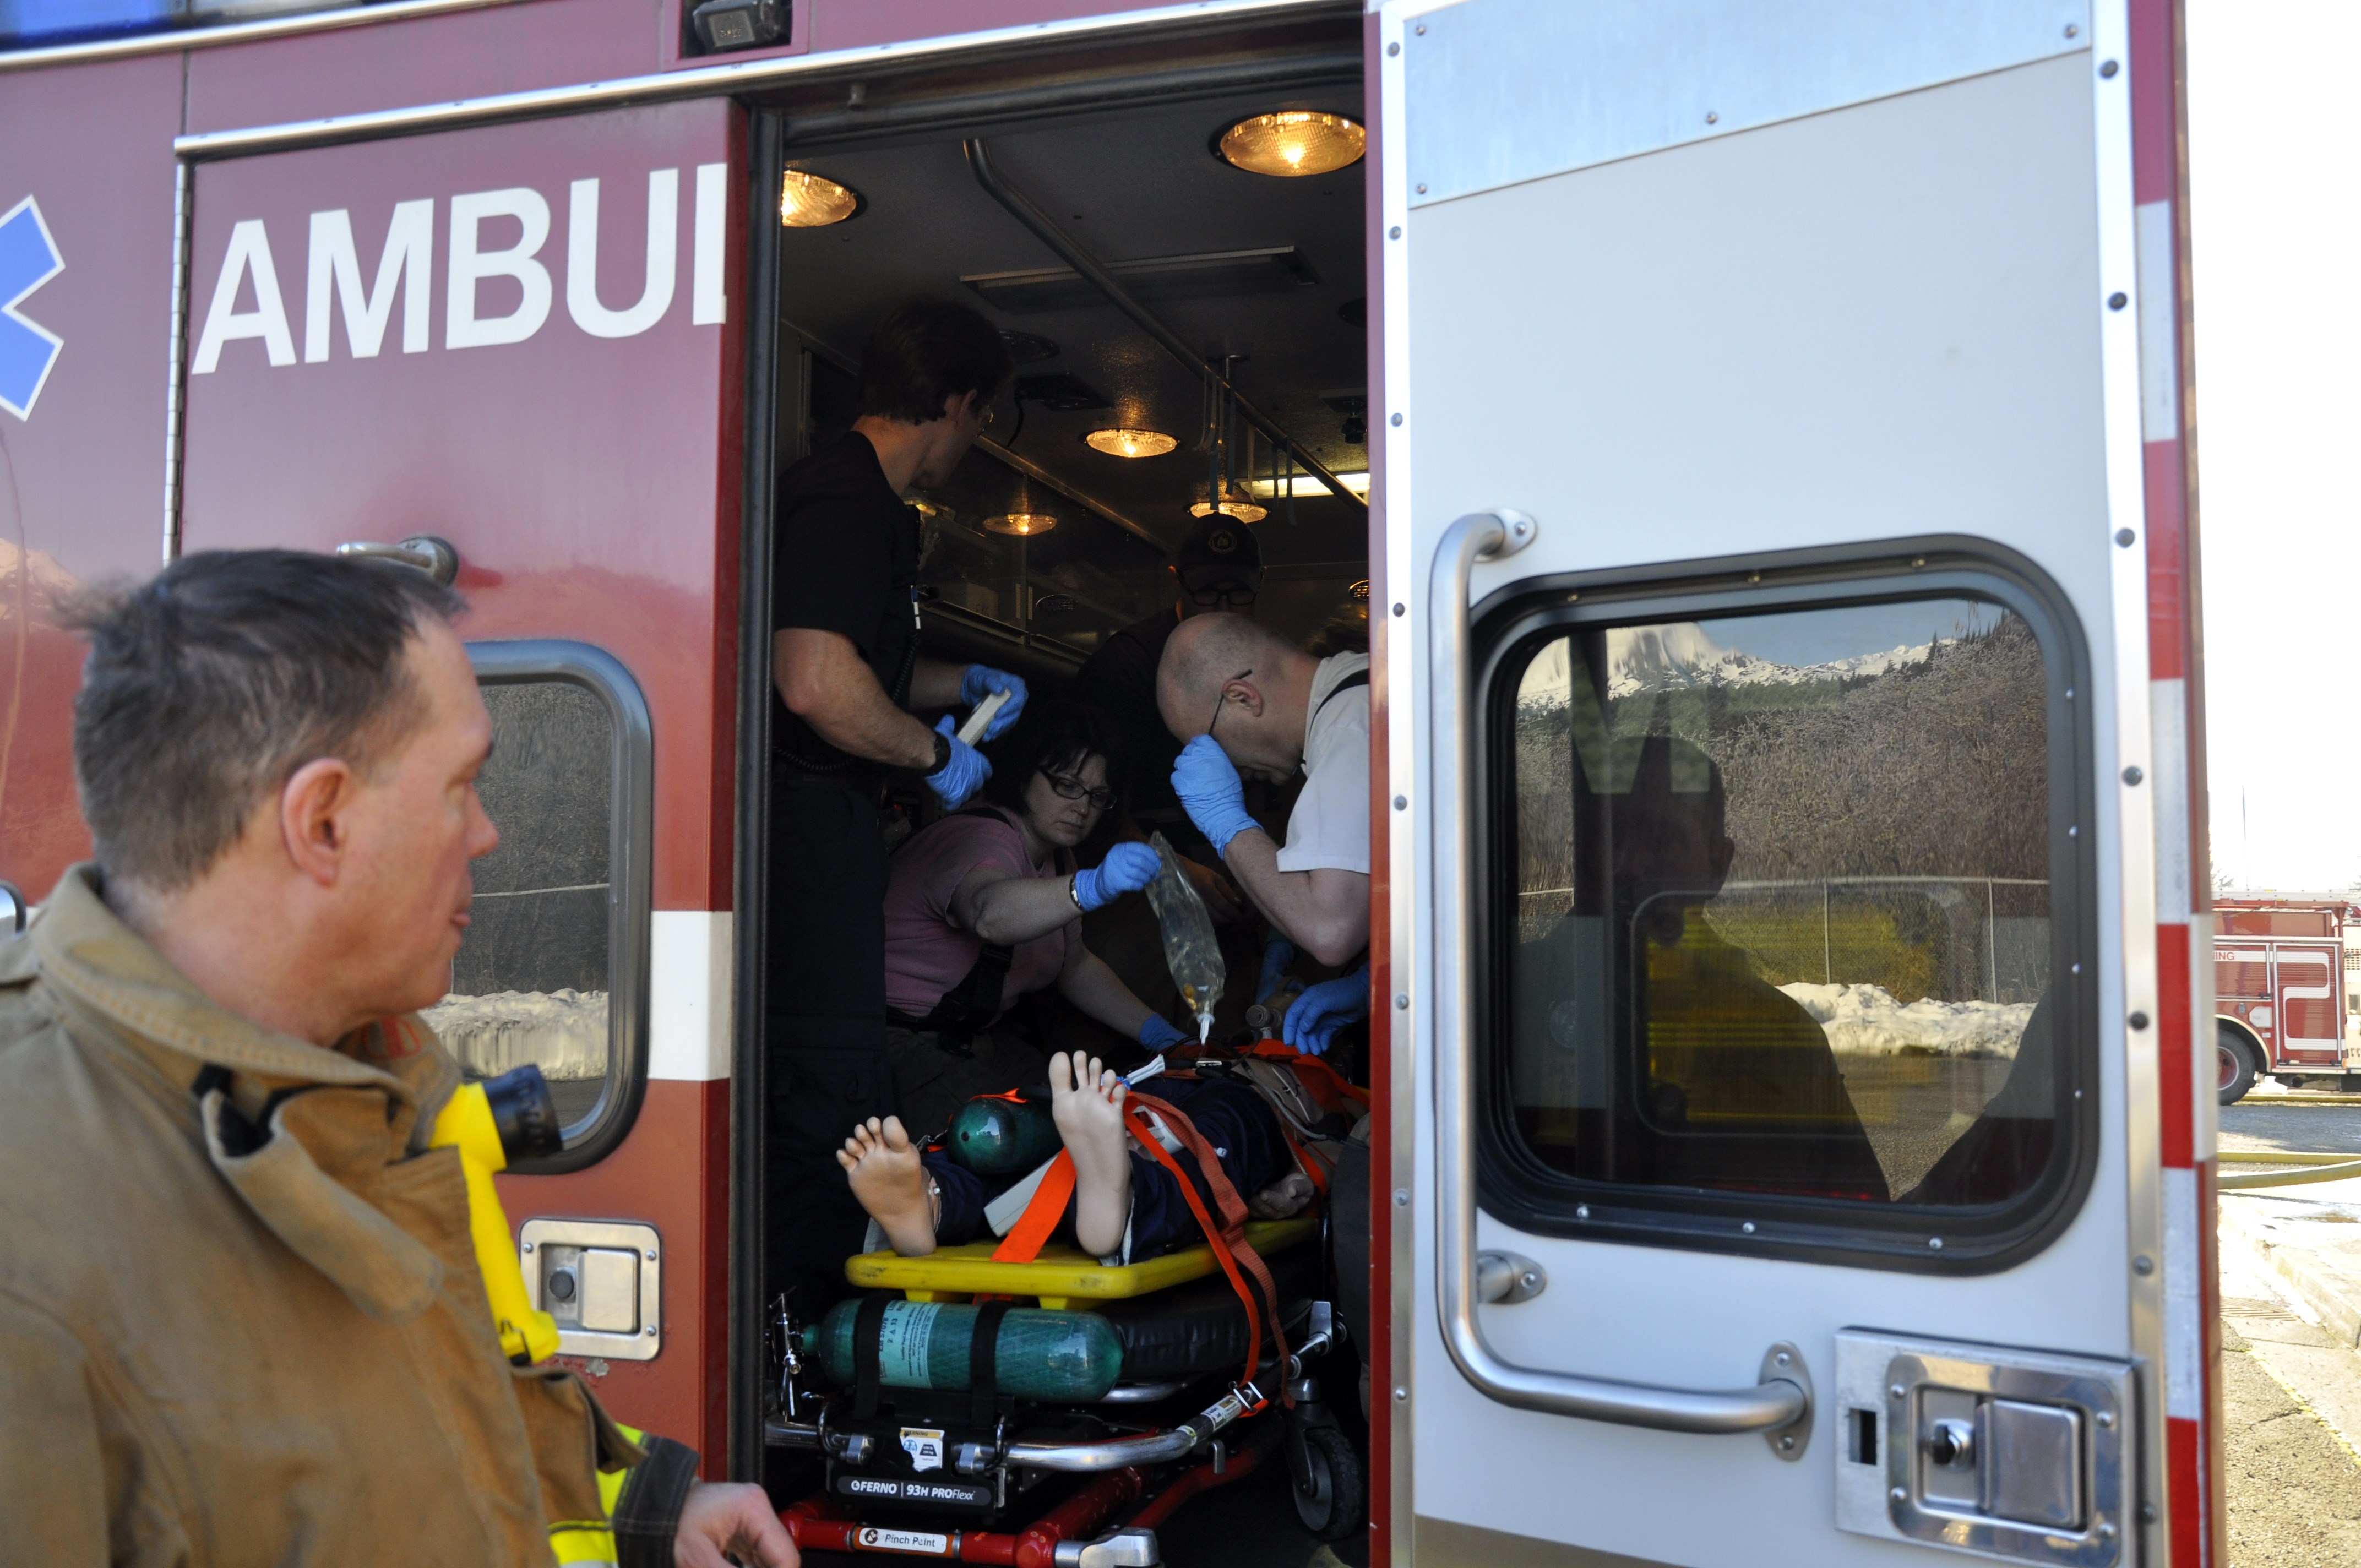 Participants load the dummy into the ambulance where they will perform CPR on the patient while the vehicle is in motion. (Photo by Annie Bartholomew/KTOO)